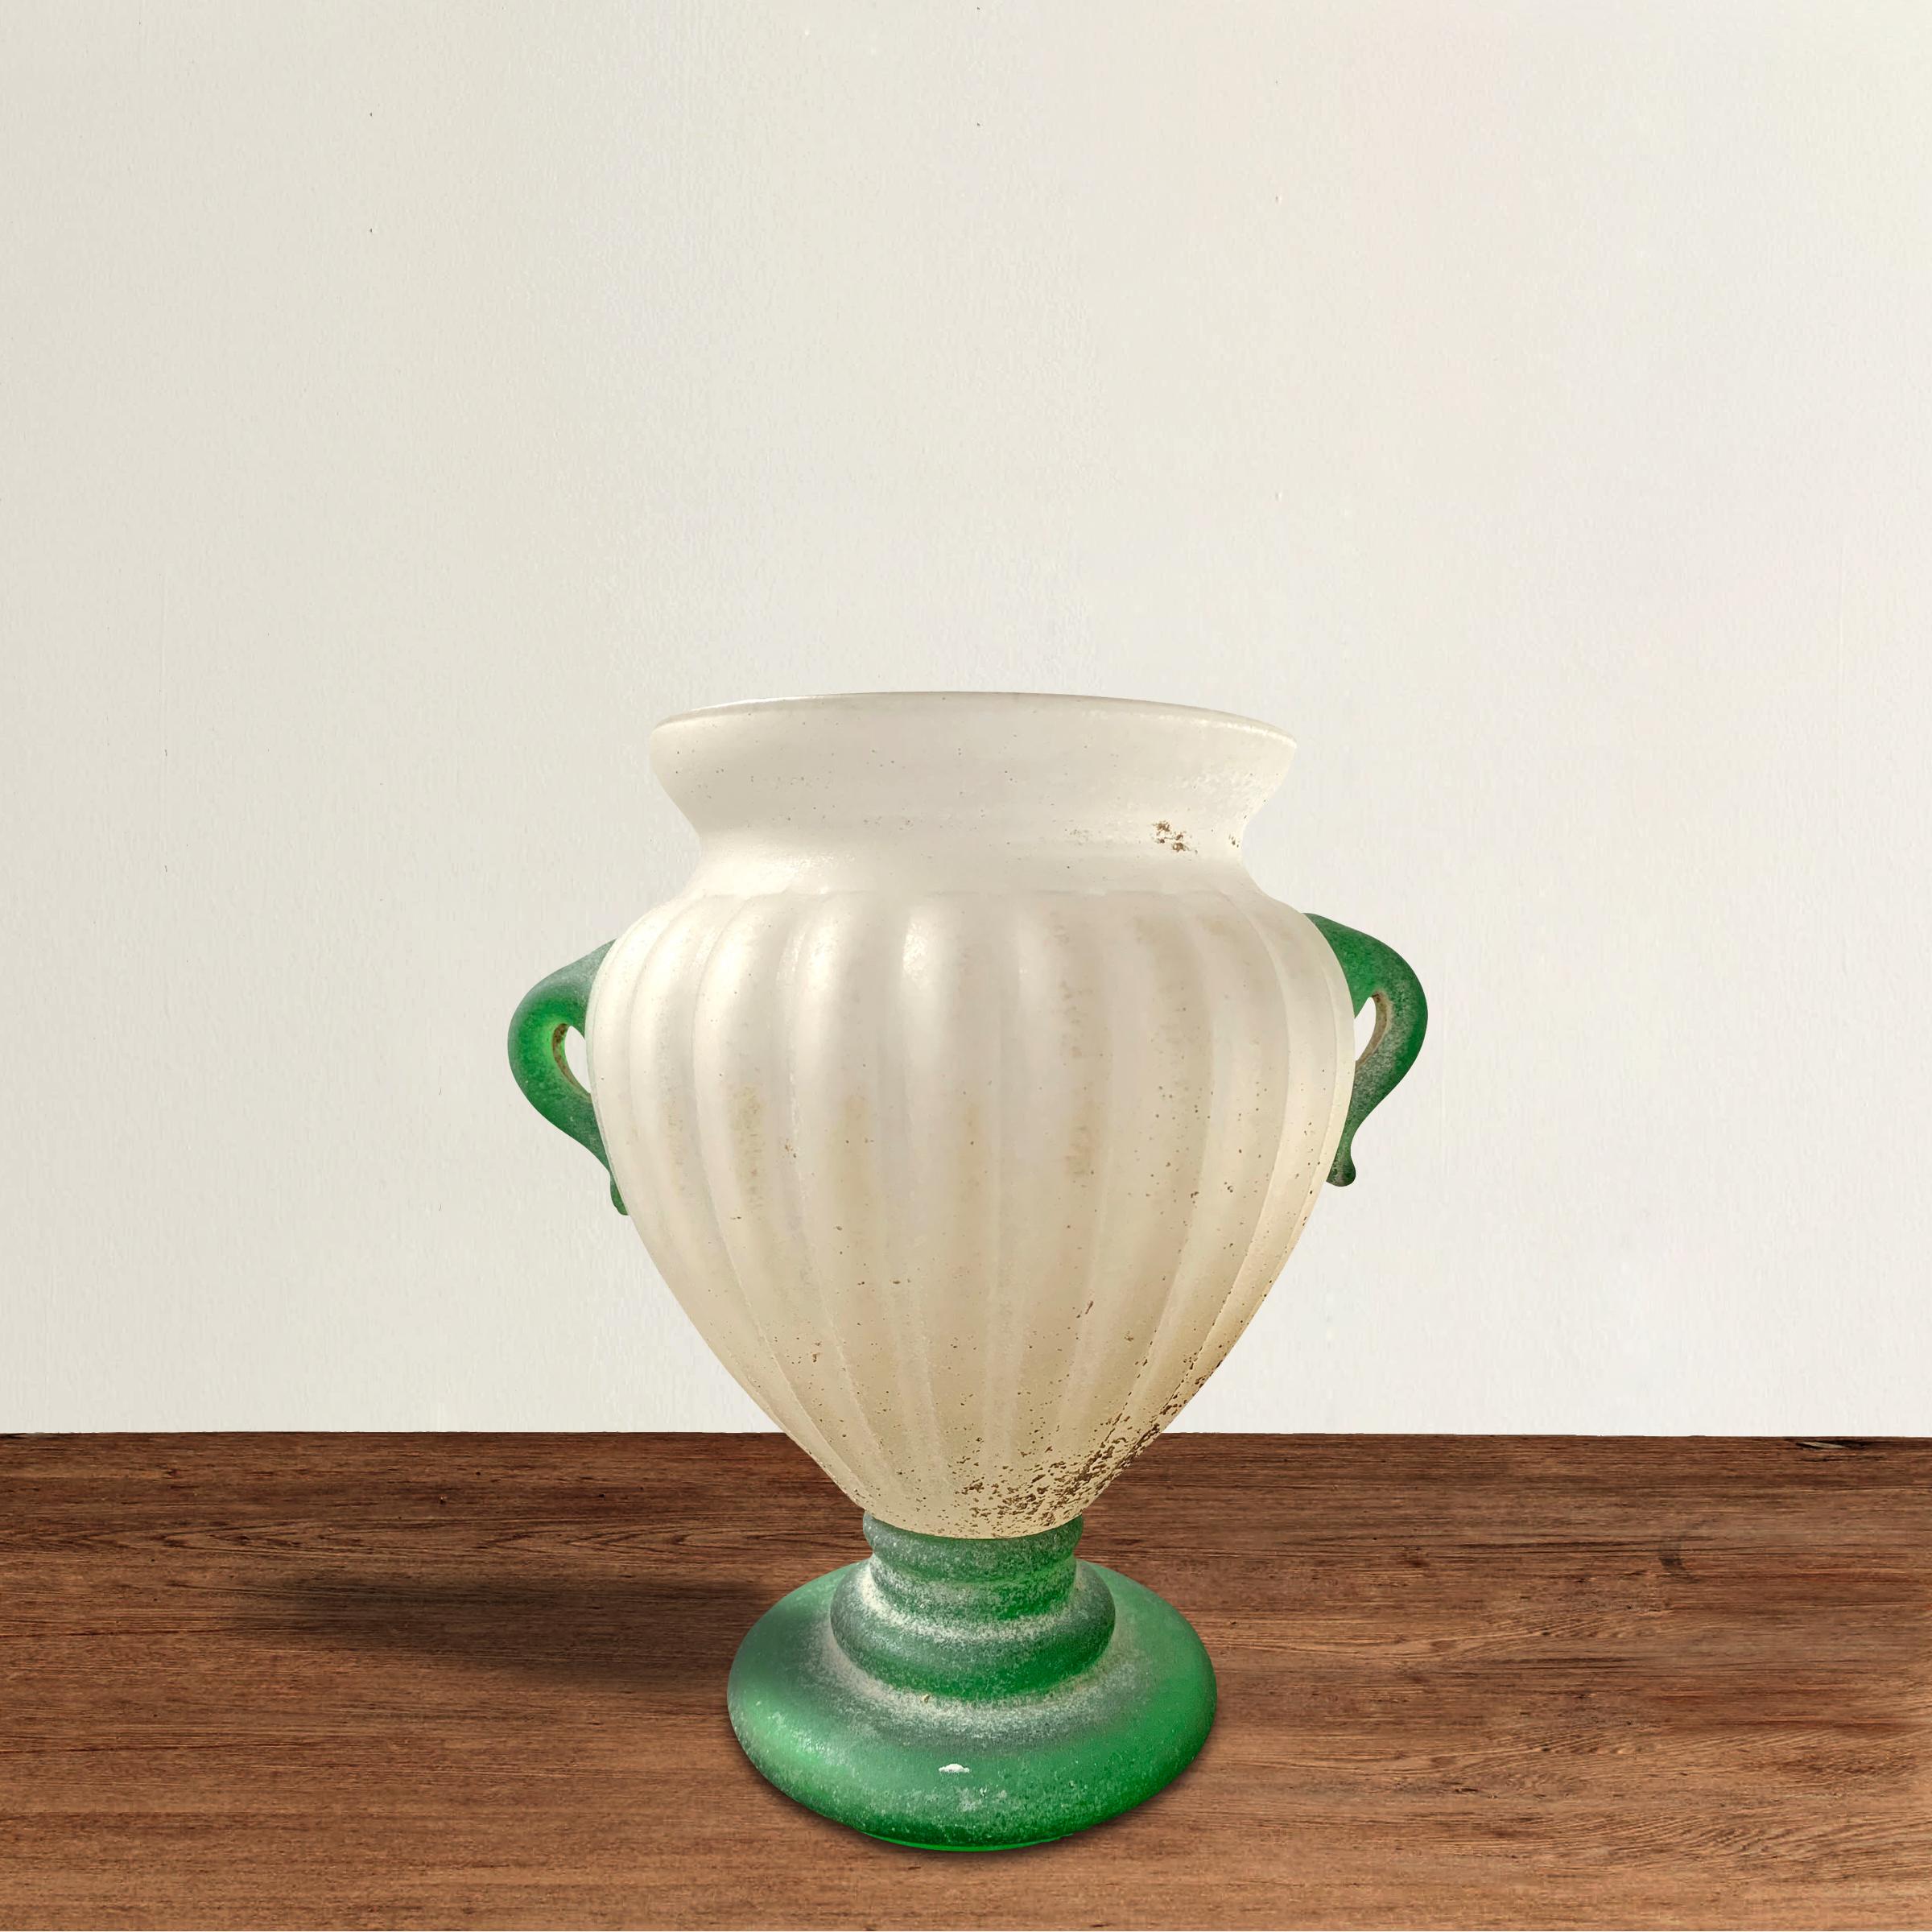 A mid-20th century Italian Murano blown scavo glass vase of Classical Roman form with two green glass handles applied to an opaque white fluted vase resting a tiered green glass foot. Scavo is Italian for 